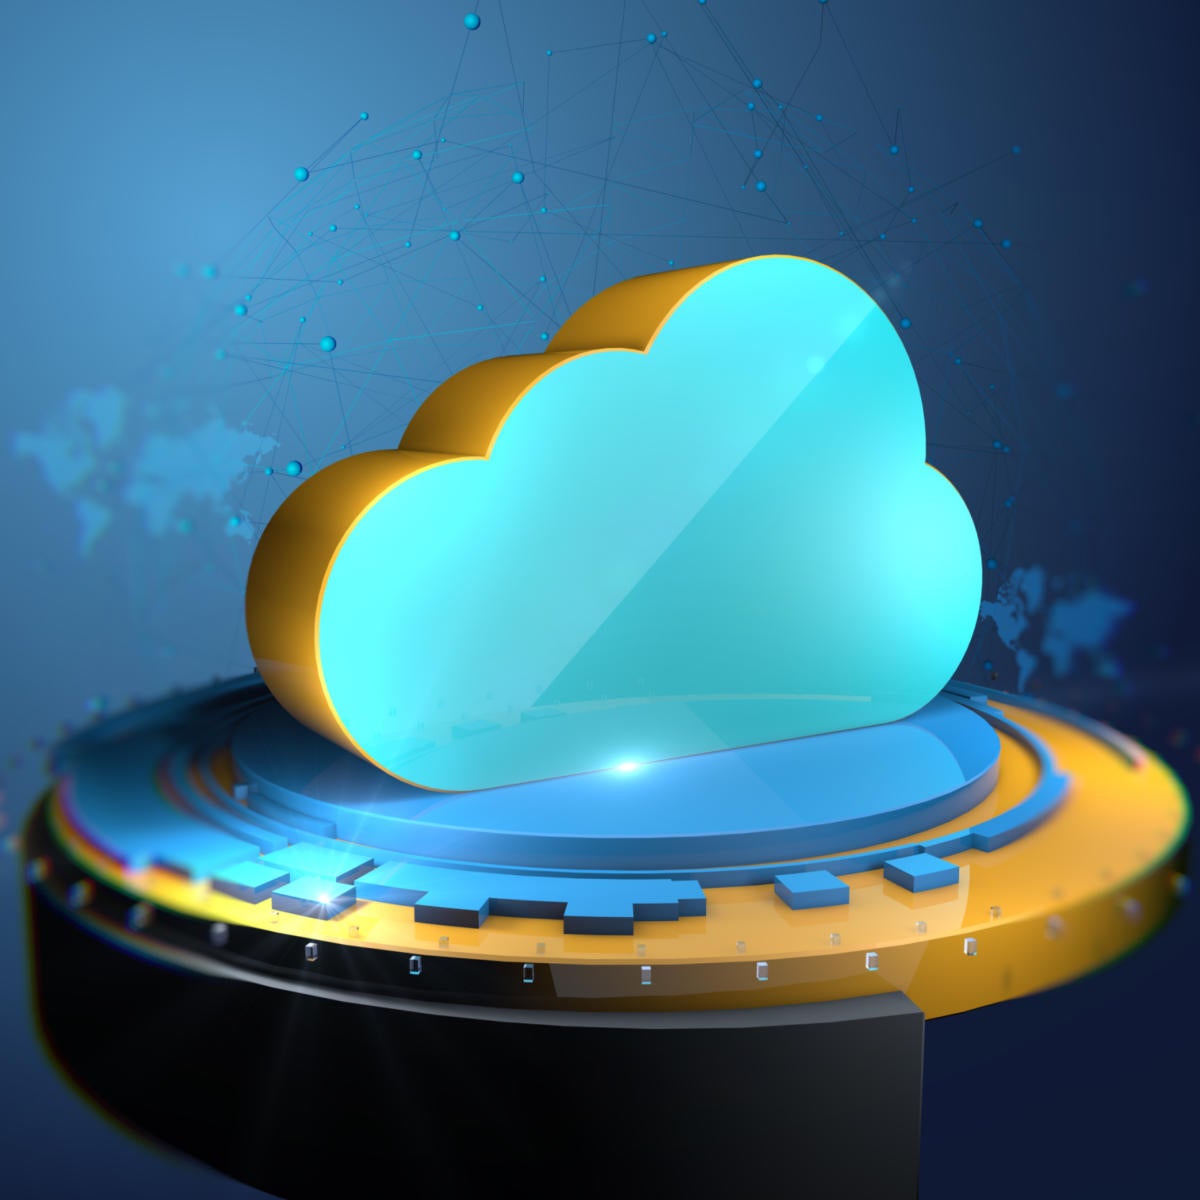 What the hybrid cloud really means